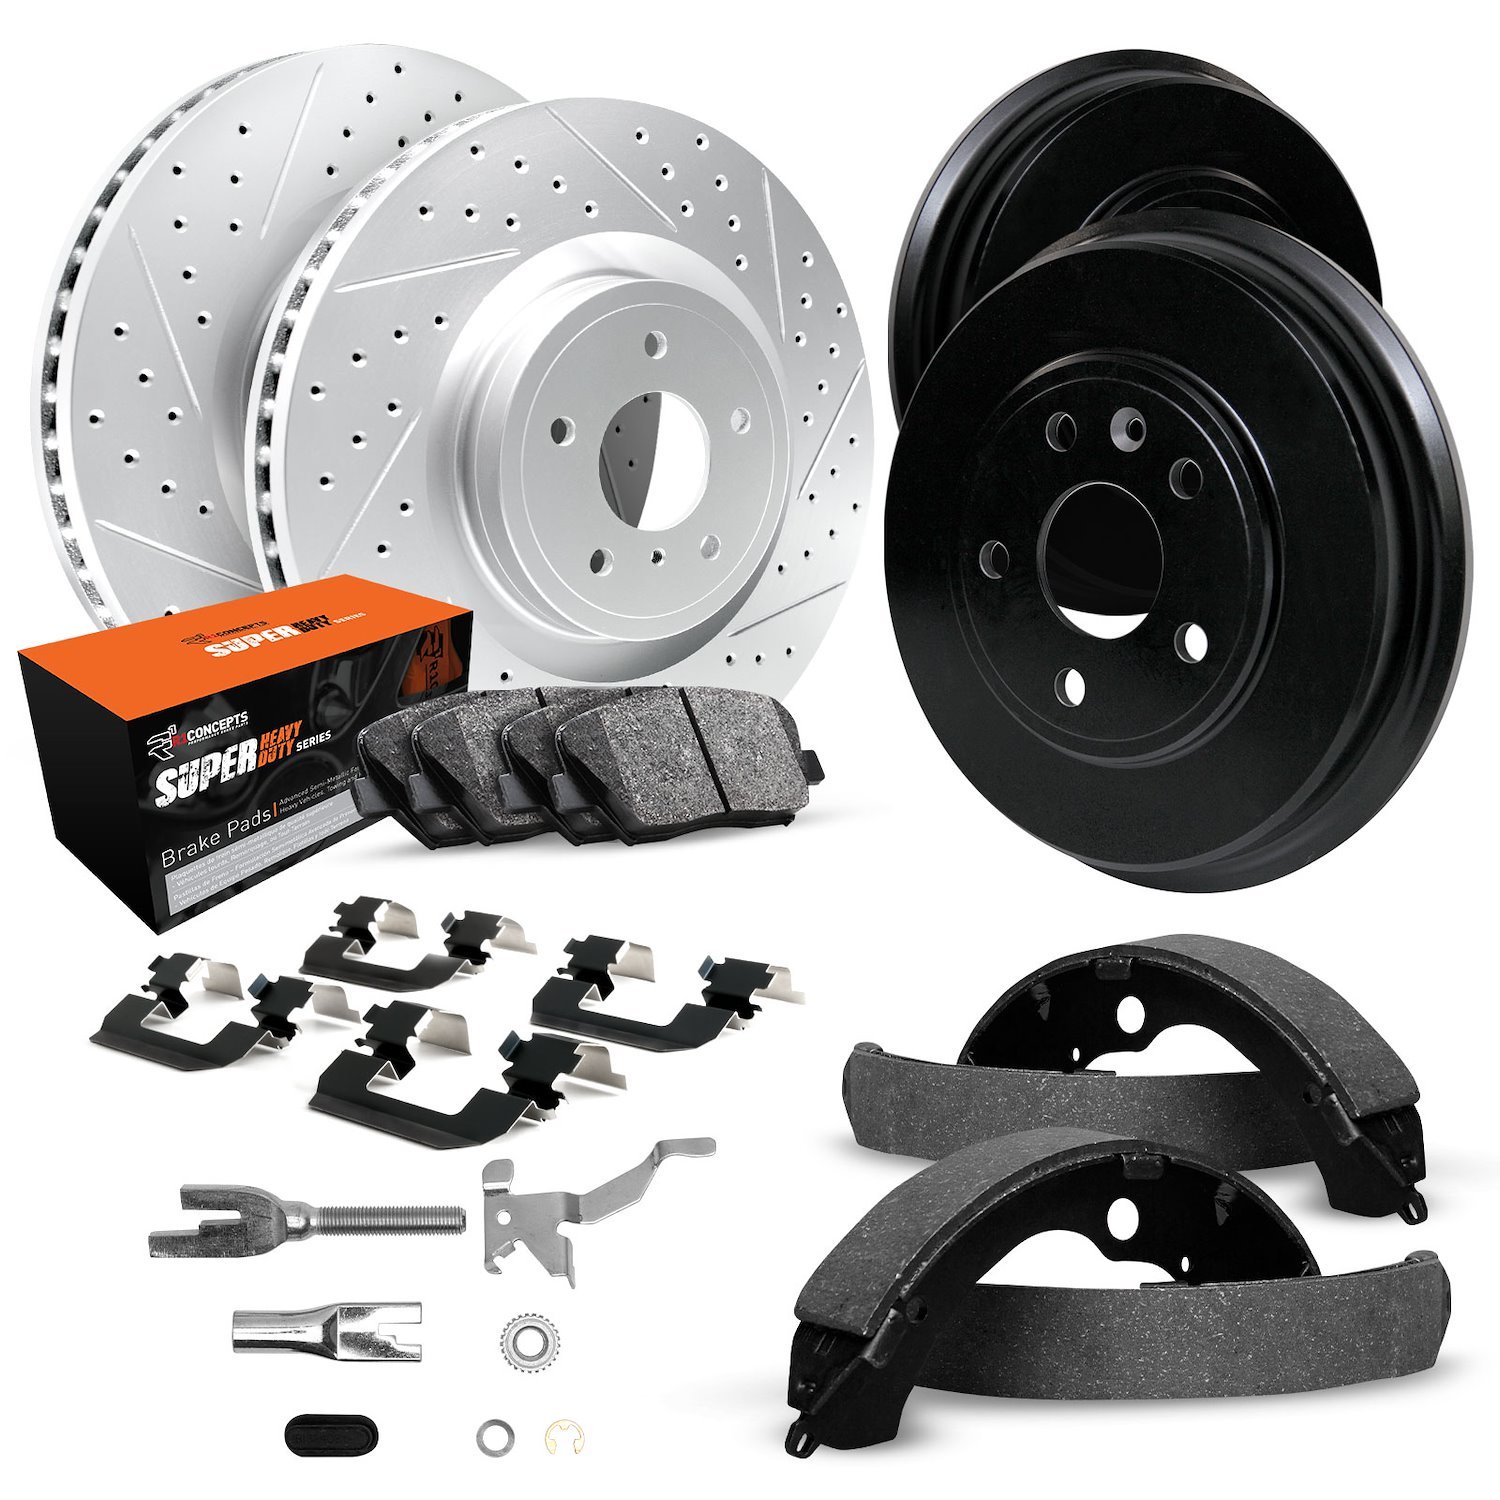 GEO-Carbon Drilled/Slotted Rotors/Drums w/Super-Duty Pads/Shoes/Hardware/Adjusters, 1991-1992 GM, Position: Front/Rear